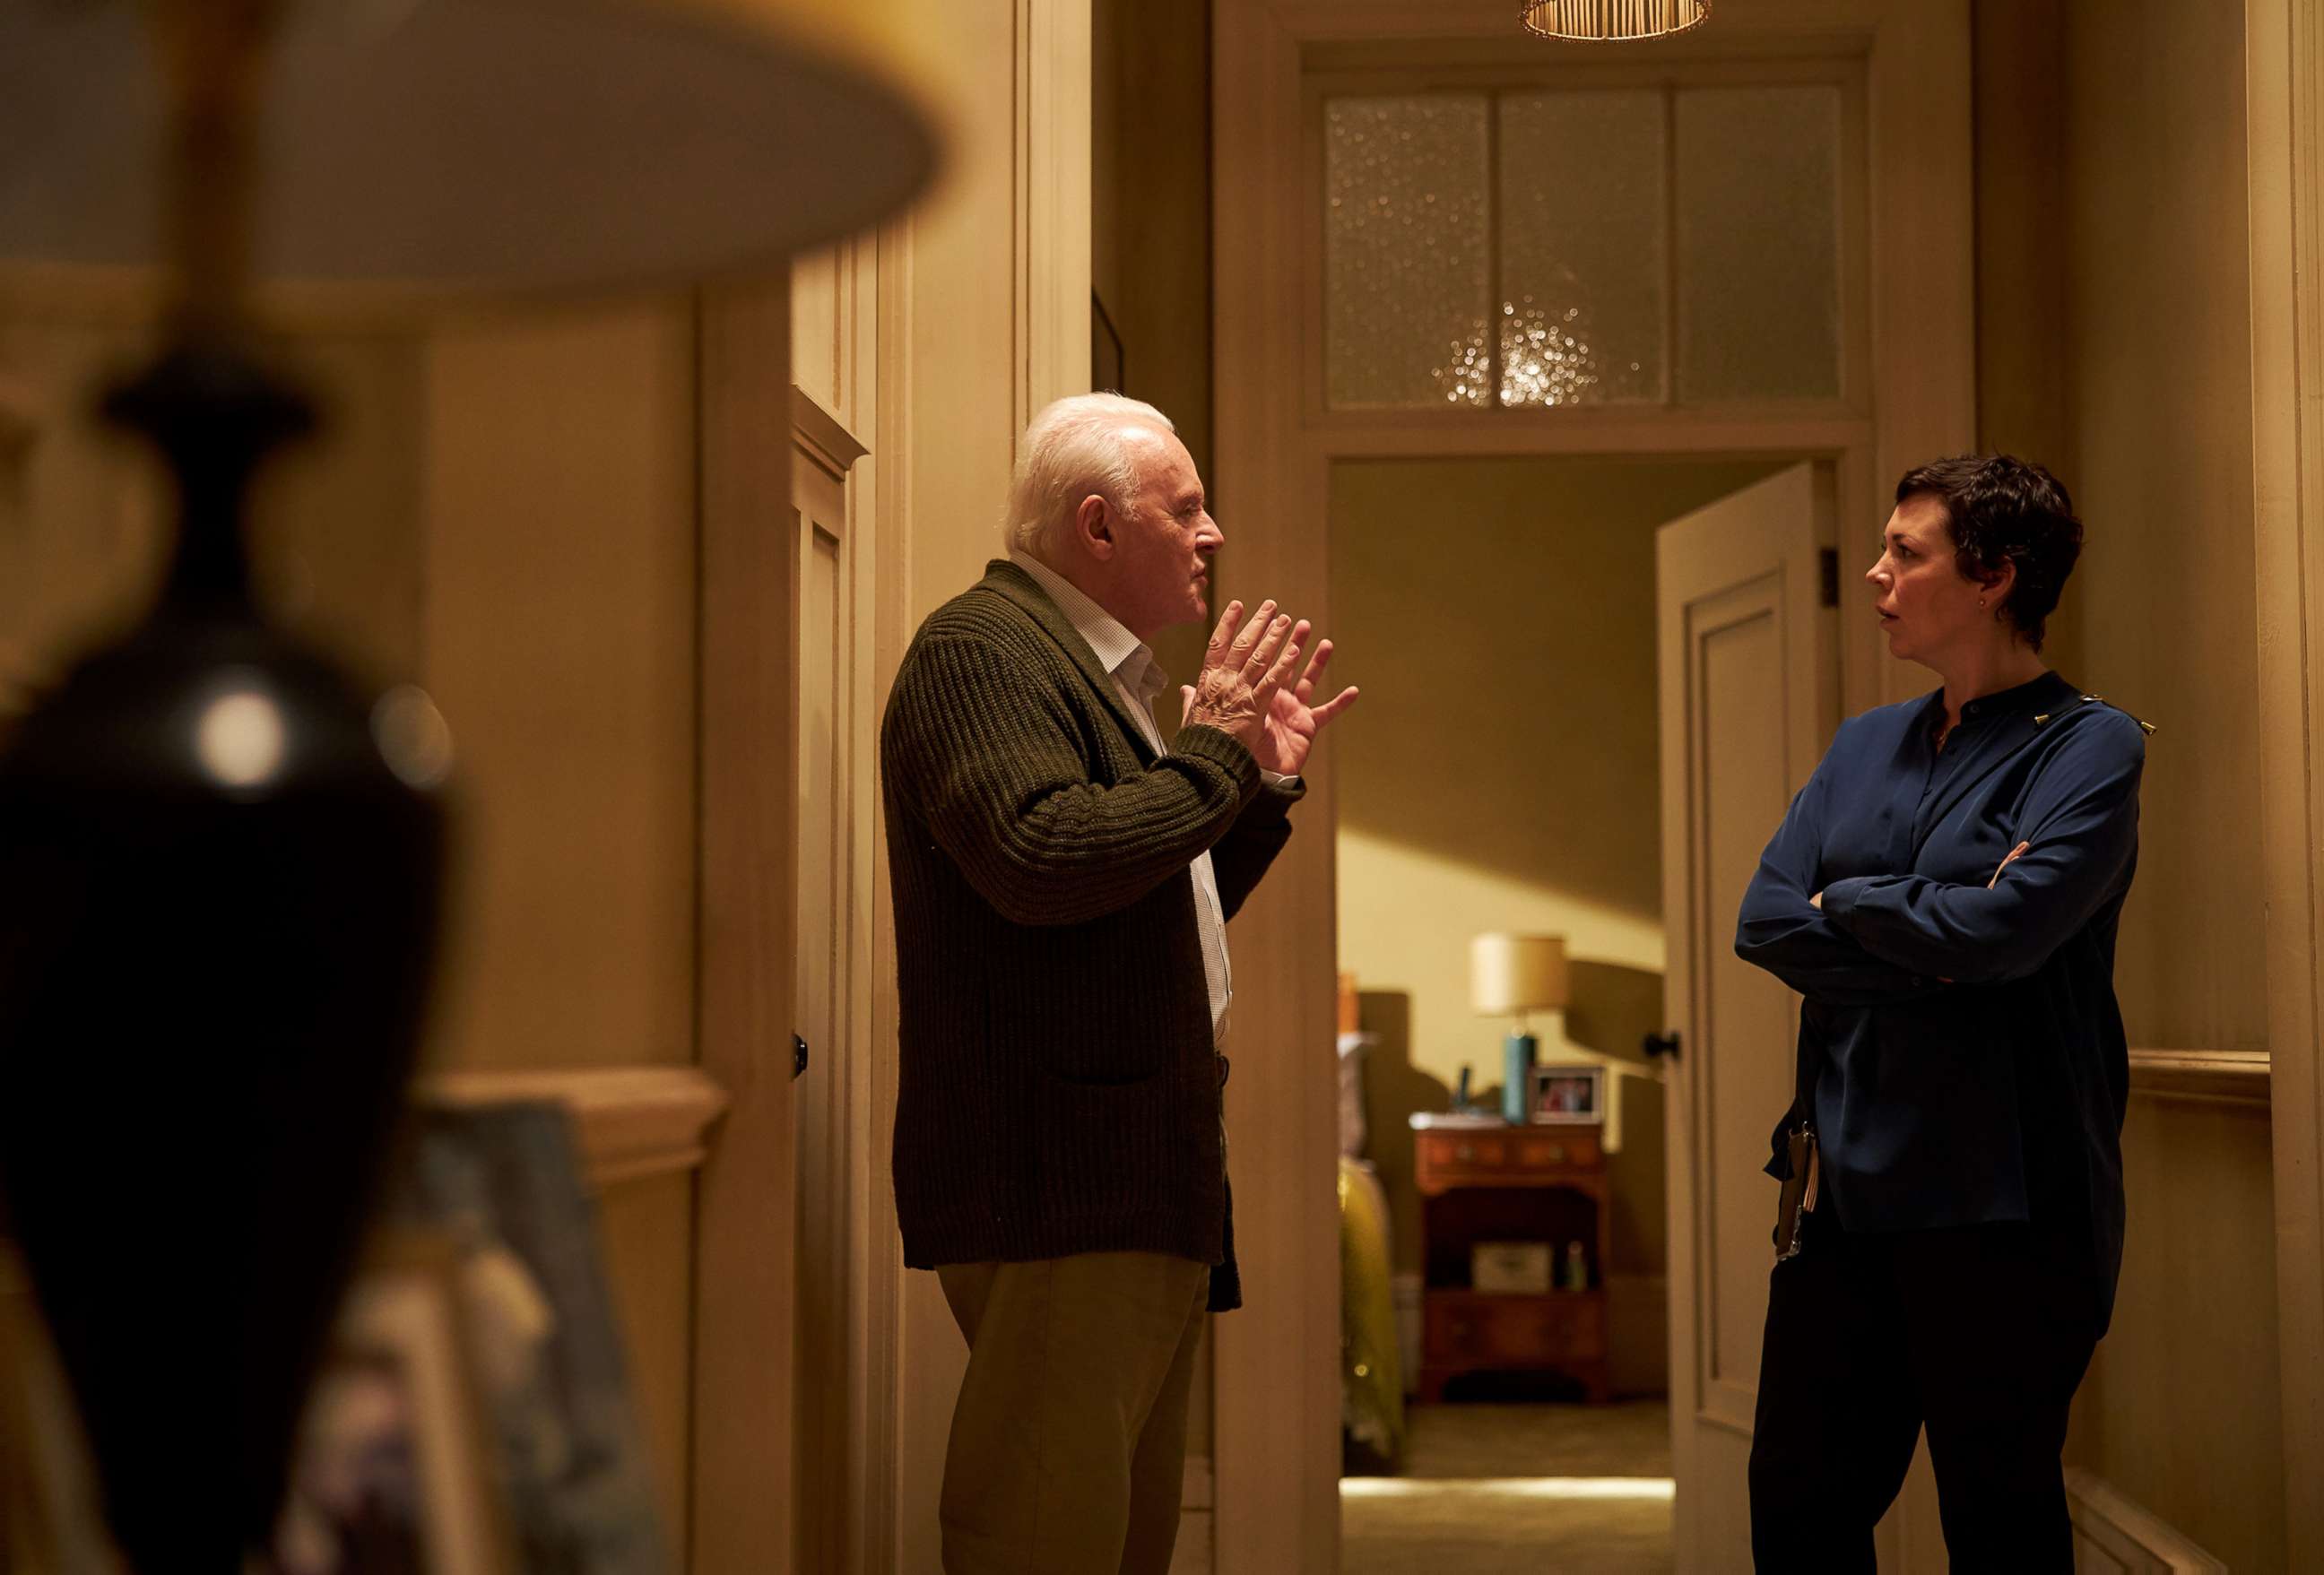 PHOTO: Olivia Colman as Anne, Anthony Hopkins as Anthony in the 2020 film, "The Father."